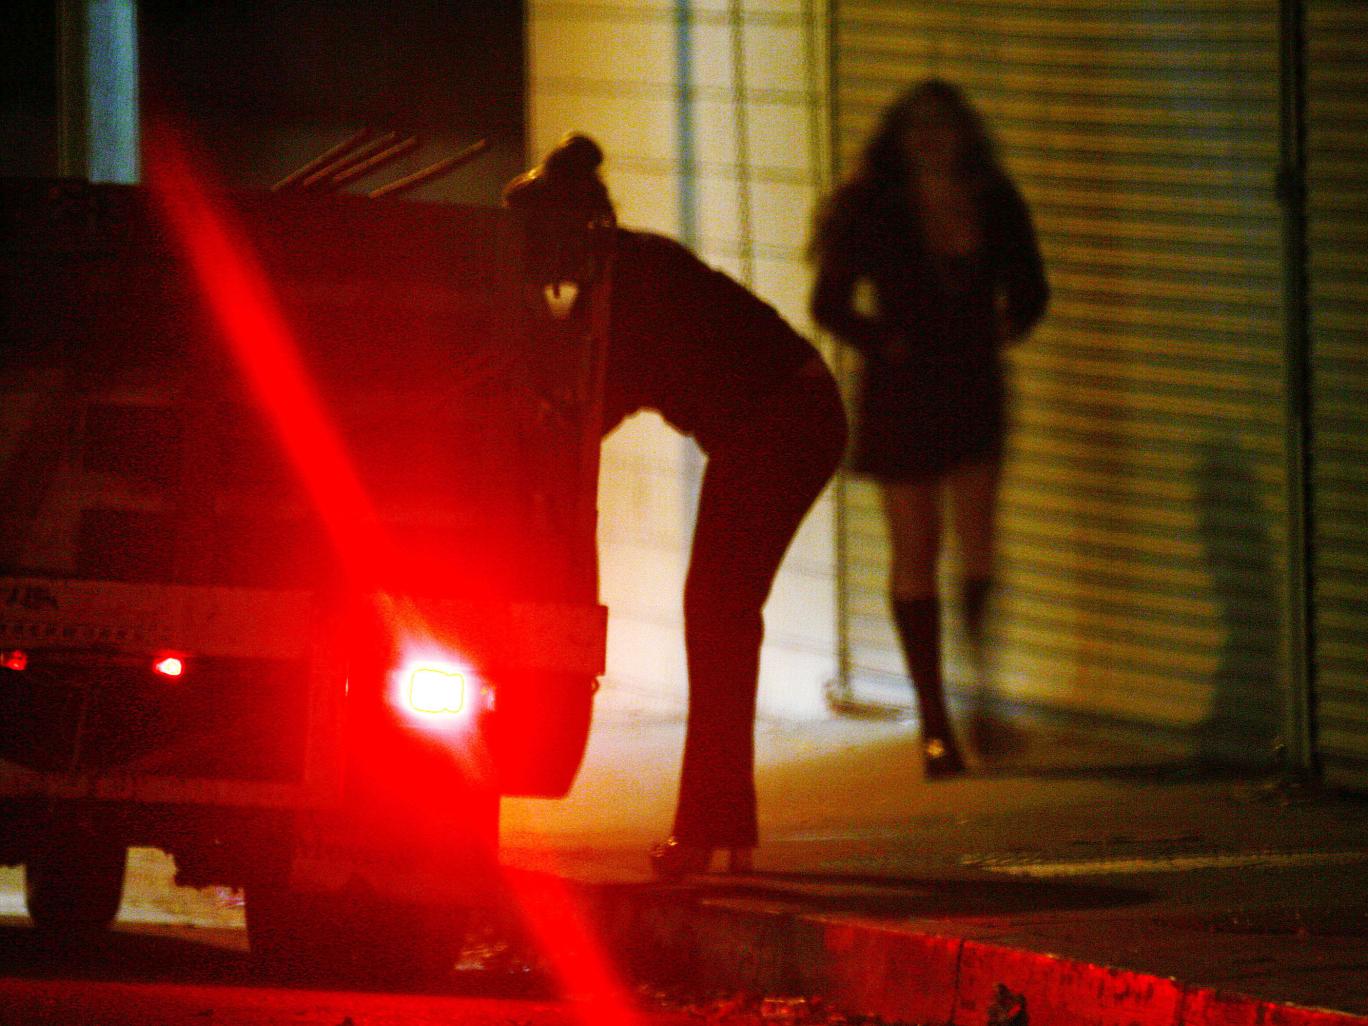 British prostitutes warn that criminalising clients would reduce safety